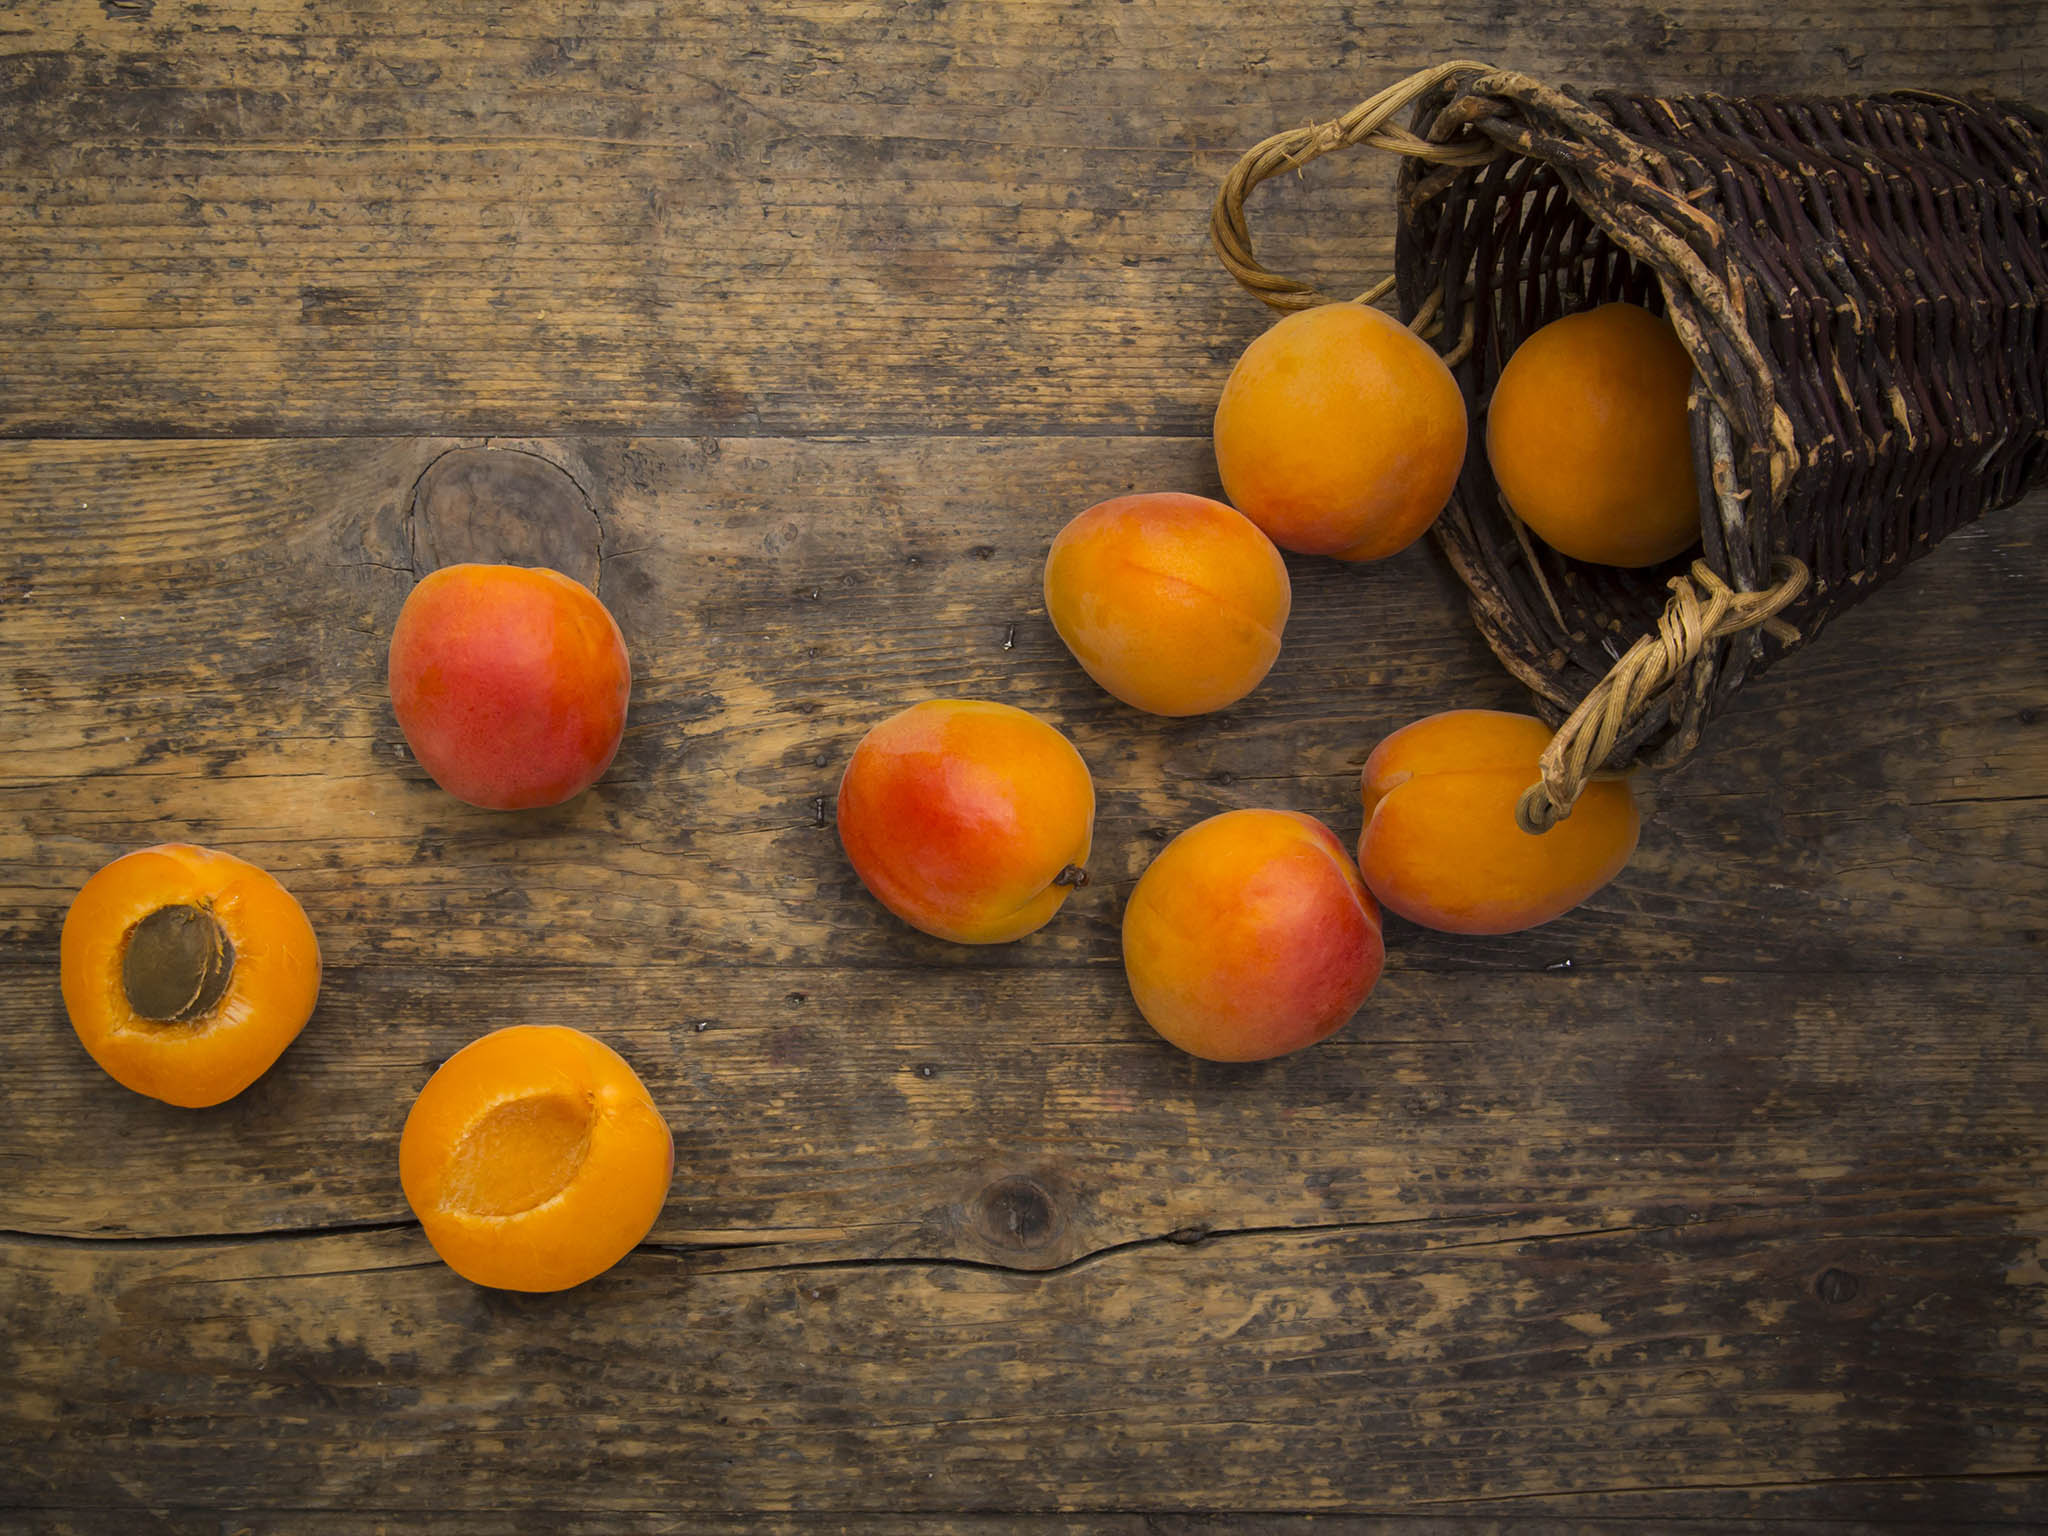 Often overlooked as a fruit to east on it’s own, apricots are also excellent to cook with